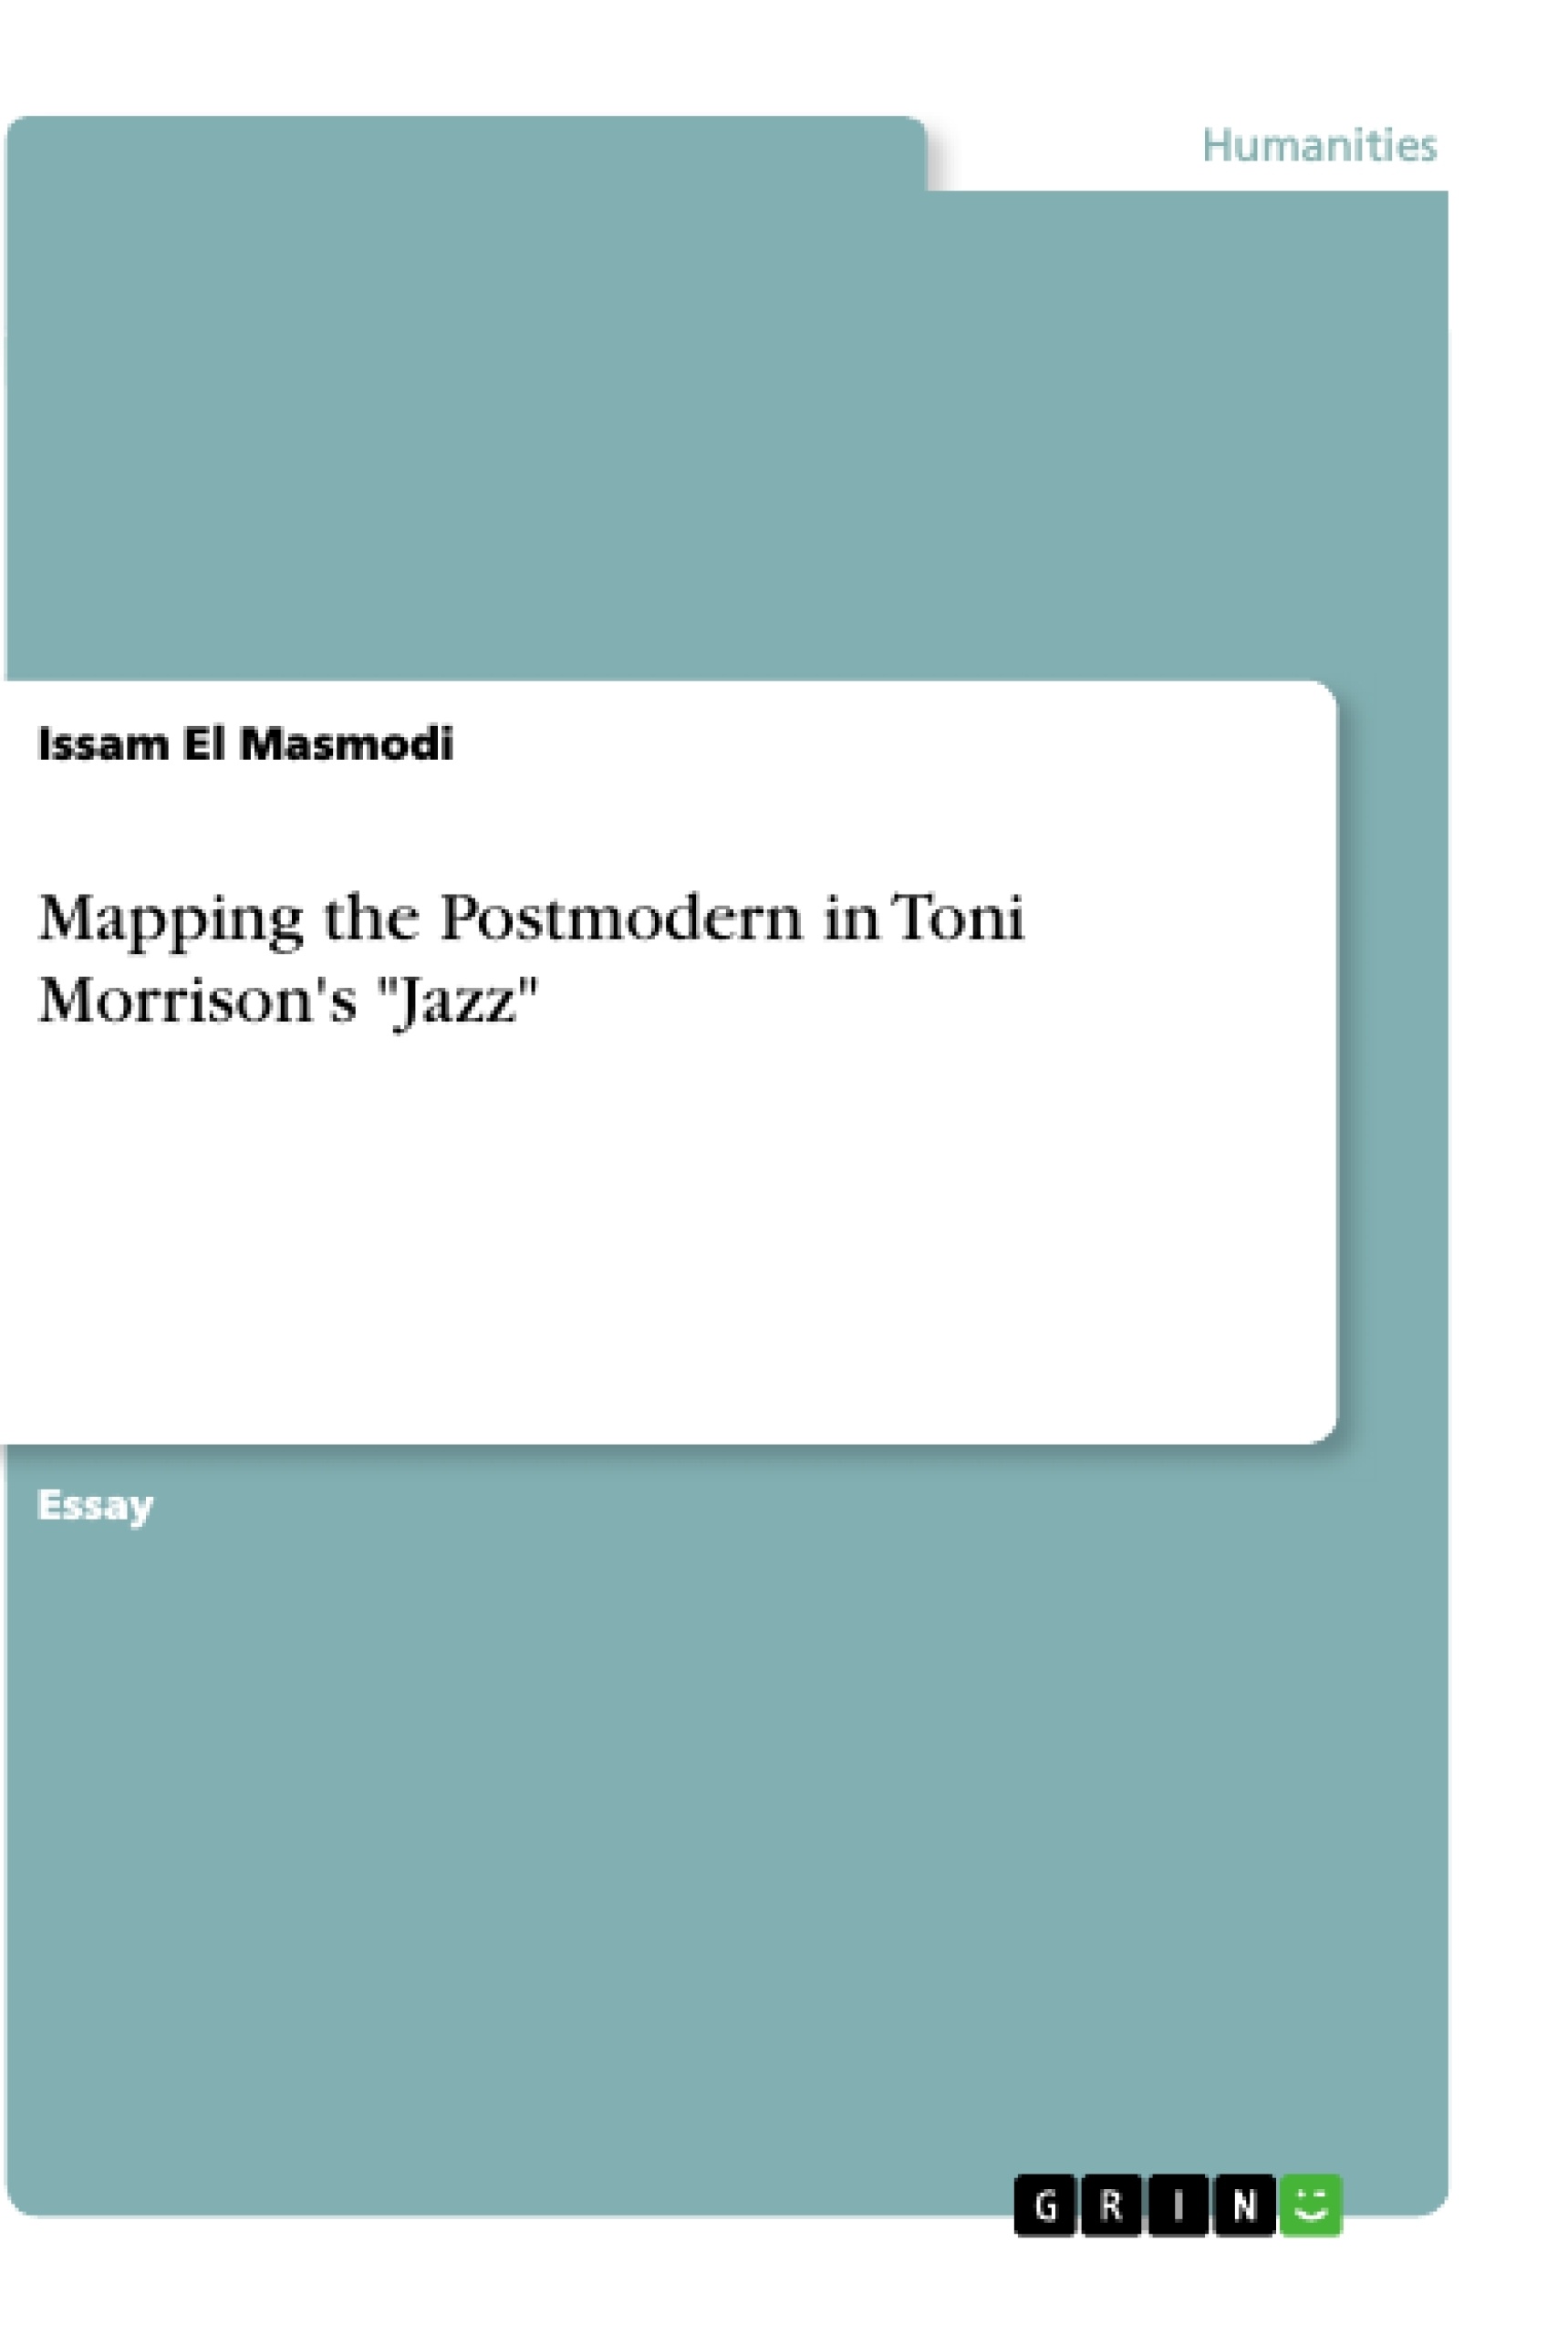 Title: Mapping the Postmodern in Toni Morrison's "Jazz"